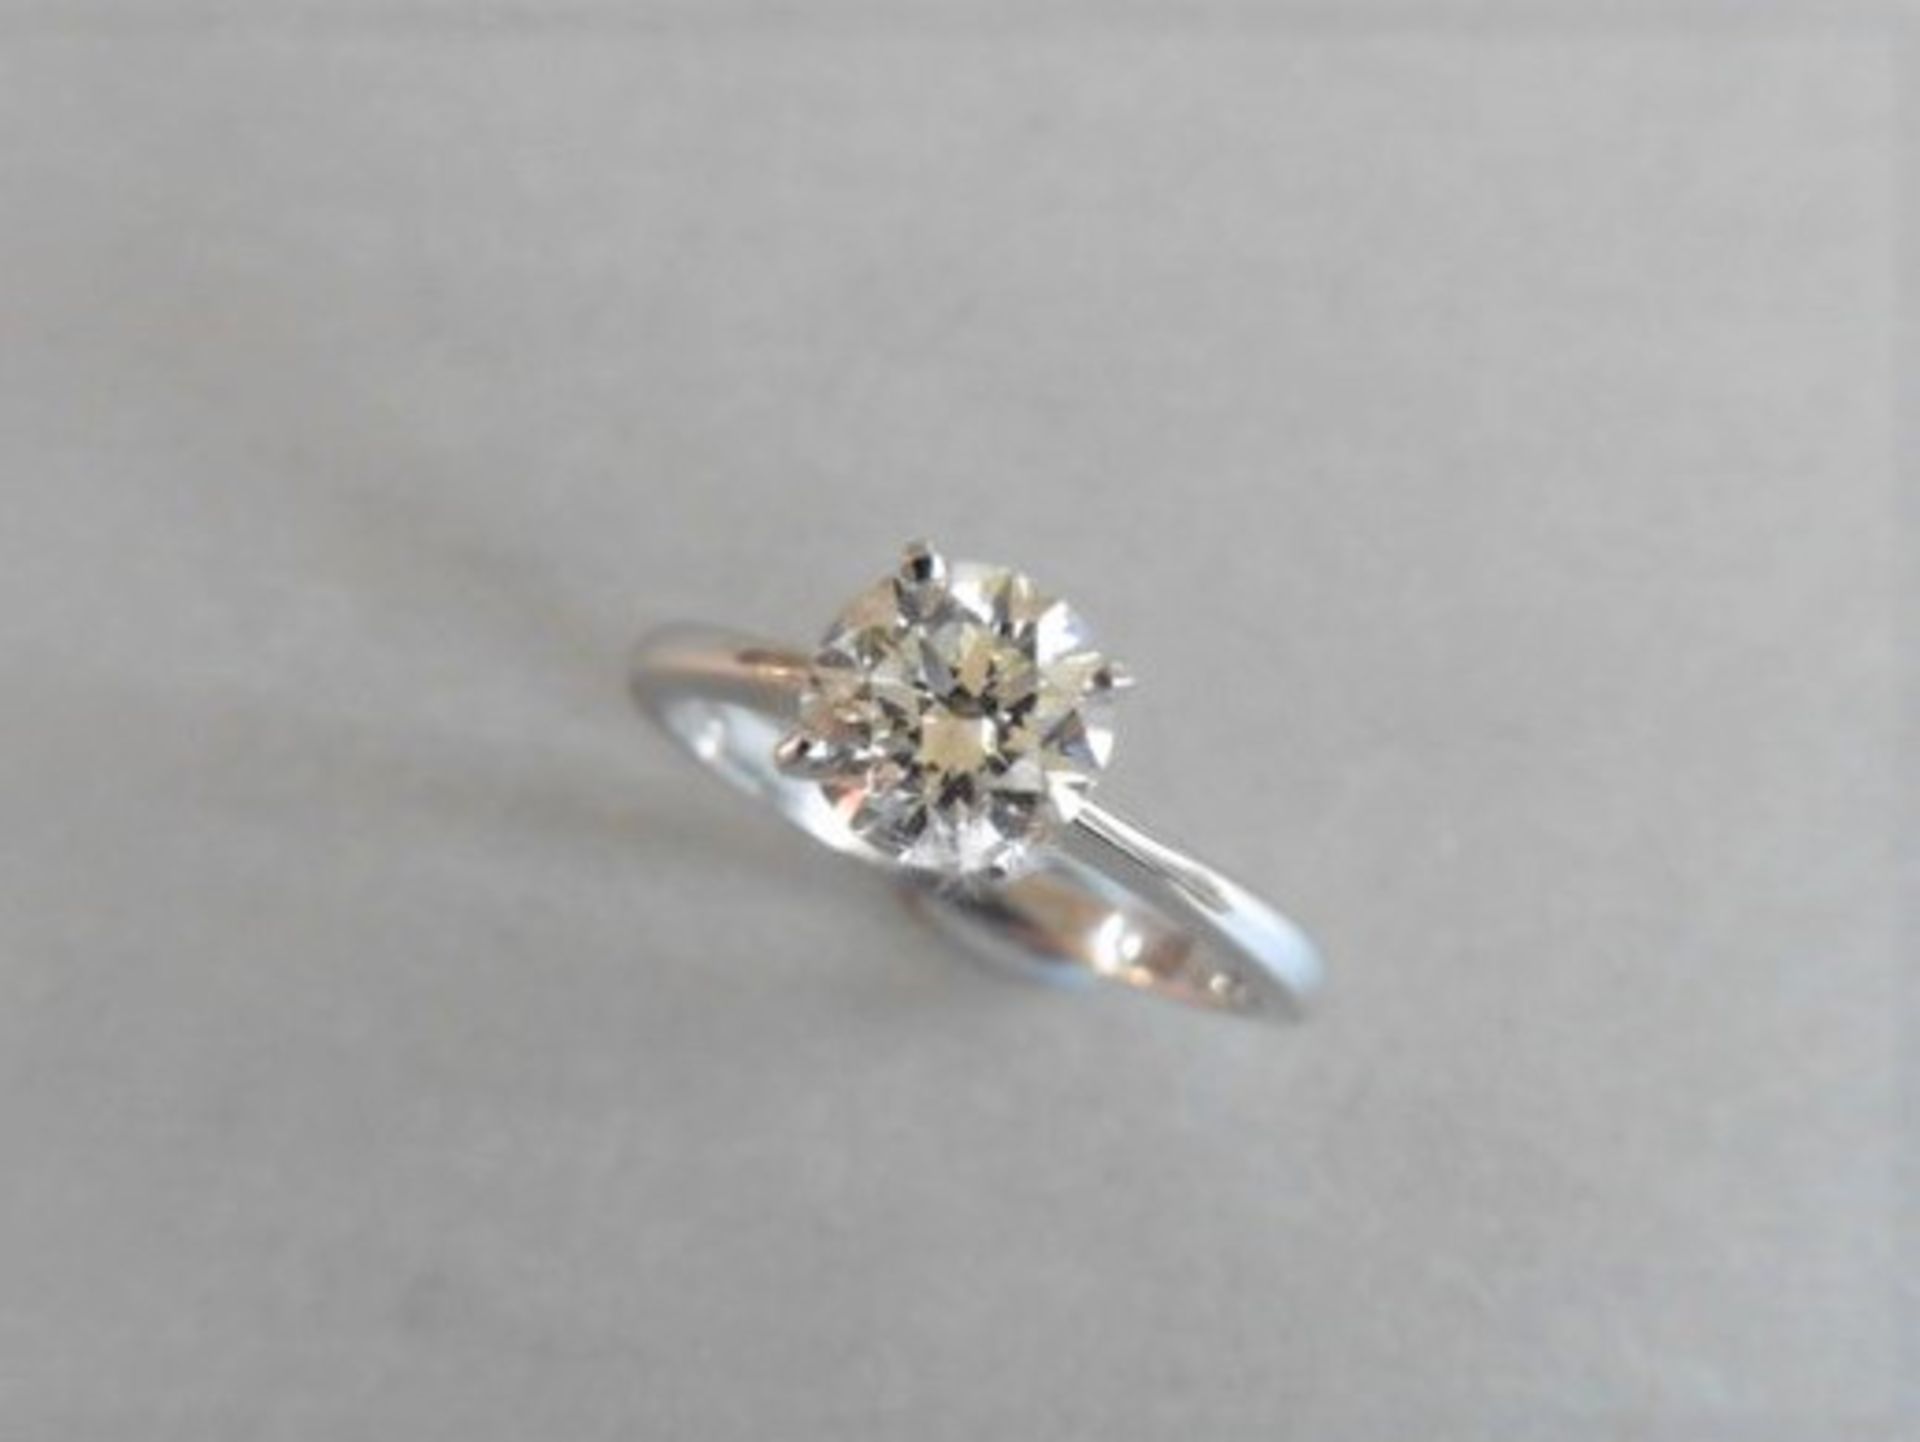 1.00ct diamond solitaire ring set in platinum. H colour and I1 clarity. 4 claw setting, size M.